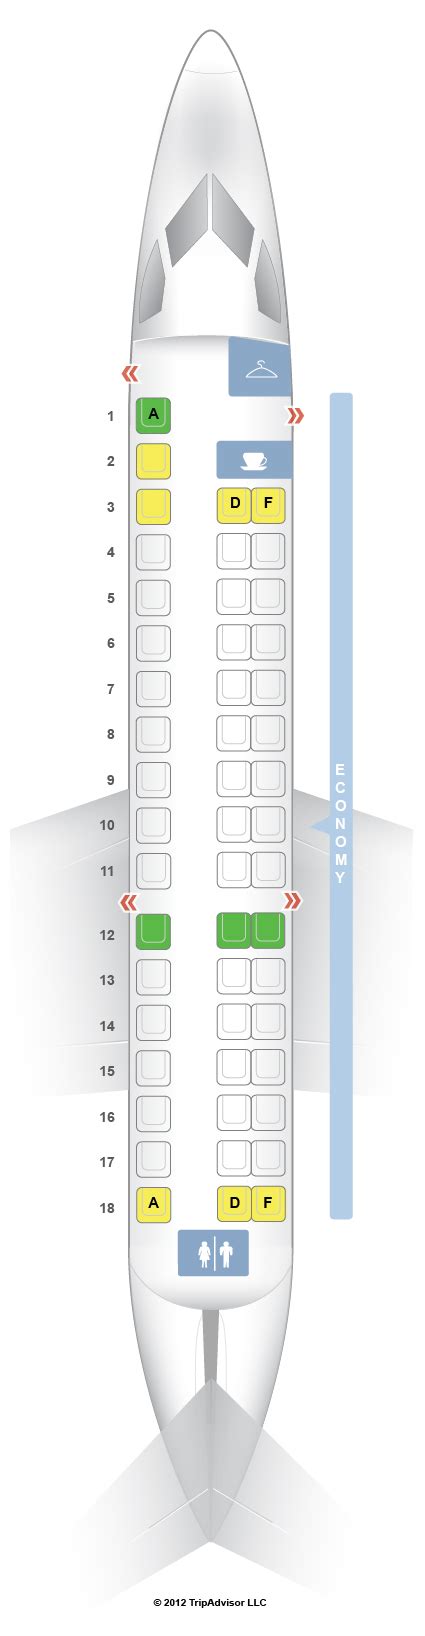 Erj 145 seat map. Economy. Seats 50. Pitch 31". Width 17". Recline 3". Travelers aboard Air Peace's Embraer ERJ 145 in economy class can expect a functional environment. Tailored for regional routes and 50 passengers, it offers essential amenities for a short-haul journey. The crew is ensuring a satisfactory flight experience. 